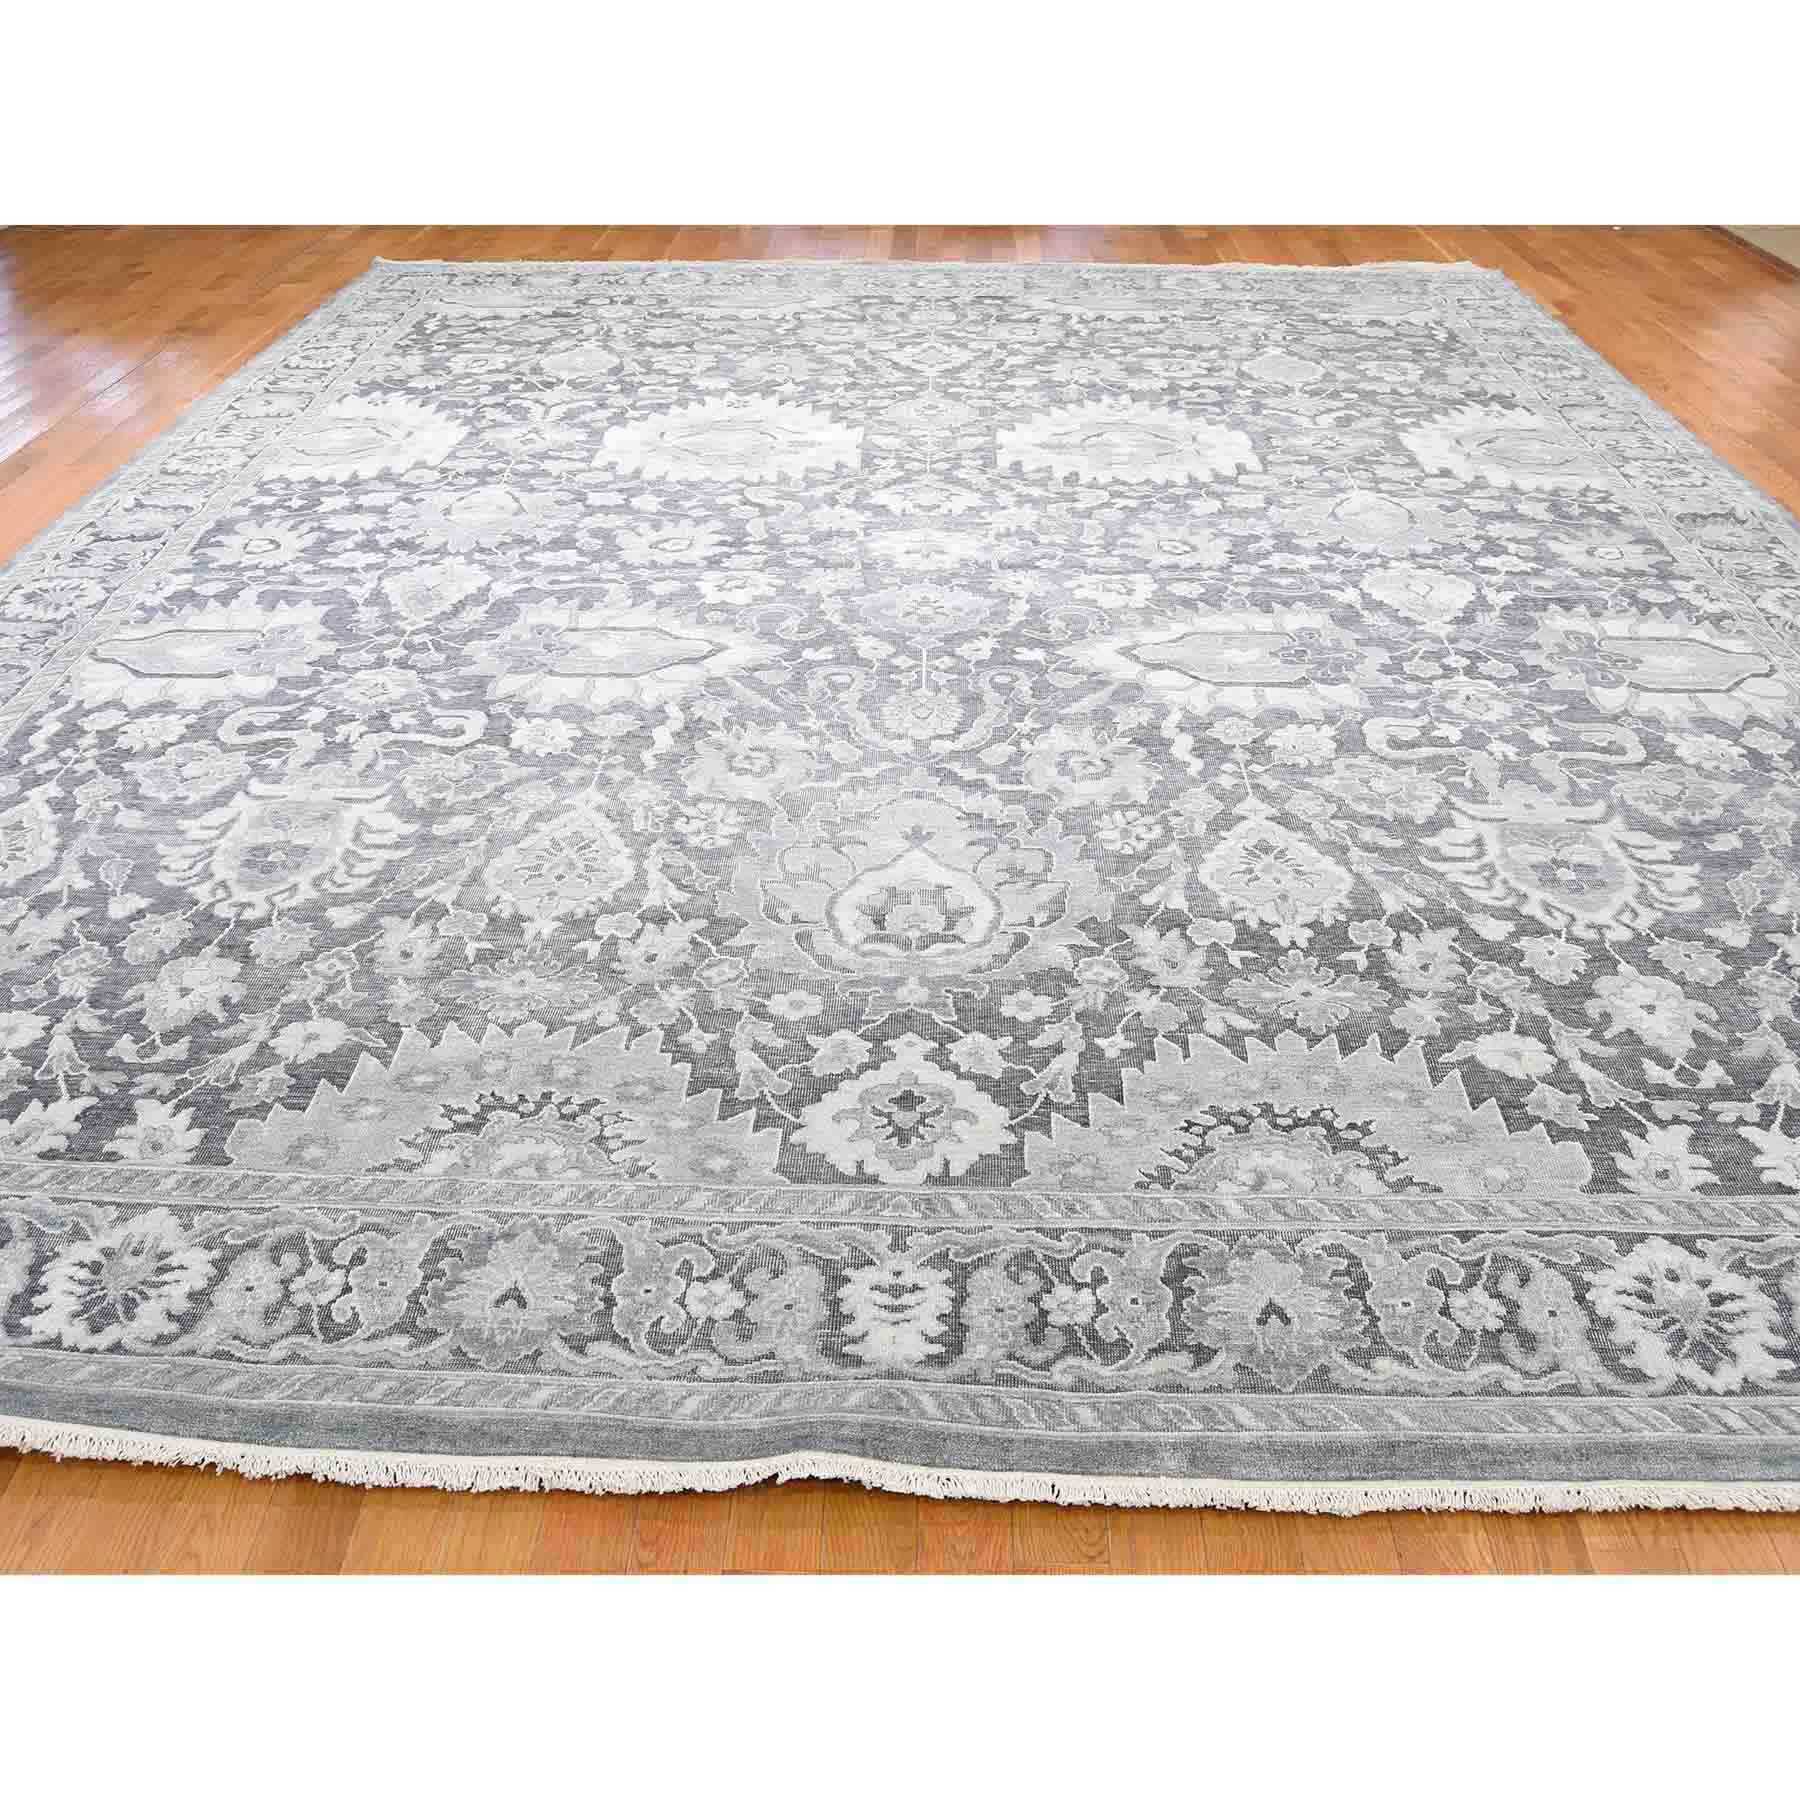 Modern-Contemporary-Hand-Knotted-Rug-203905